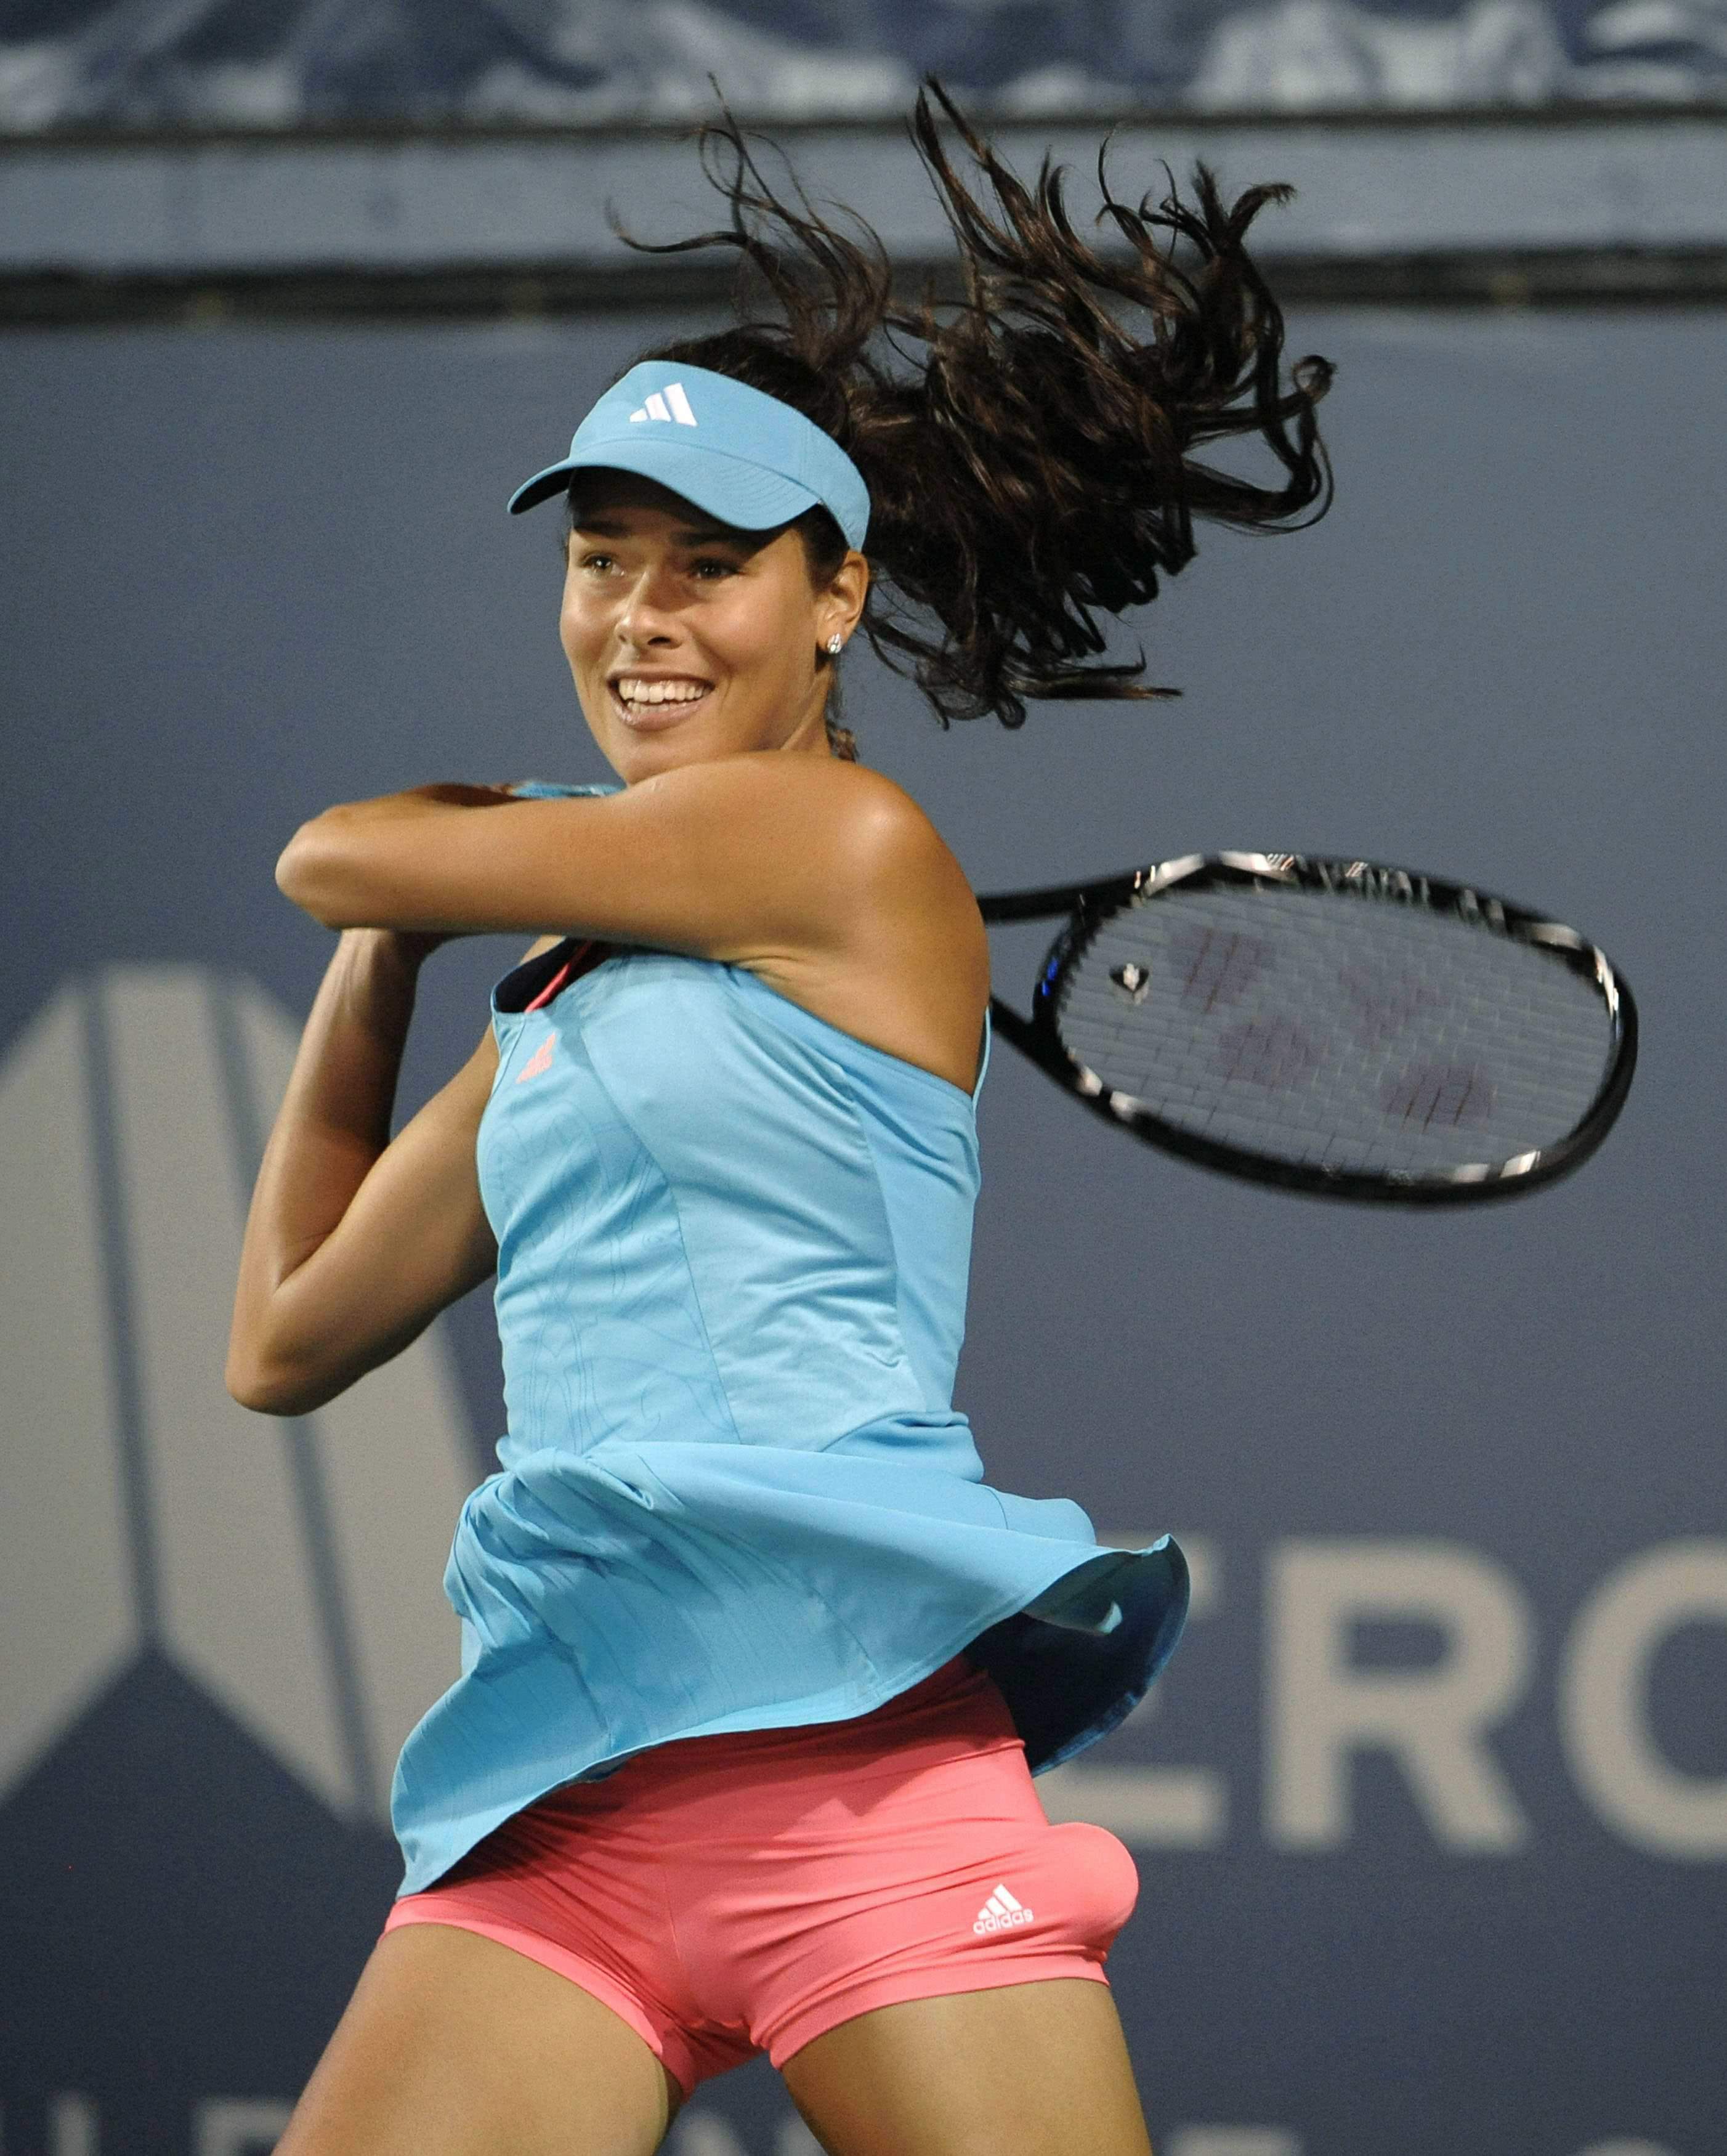 Ana Ivanovic Backgrounds, Compatible - PC, Mobile, Gadgets| 2804x3500 px